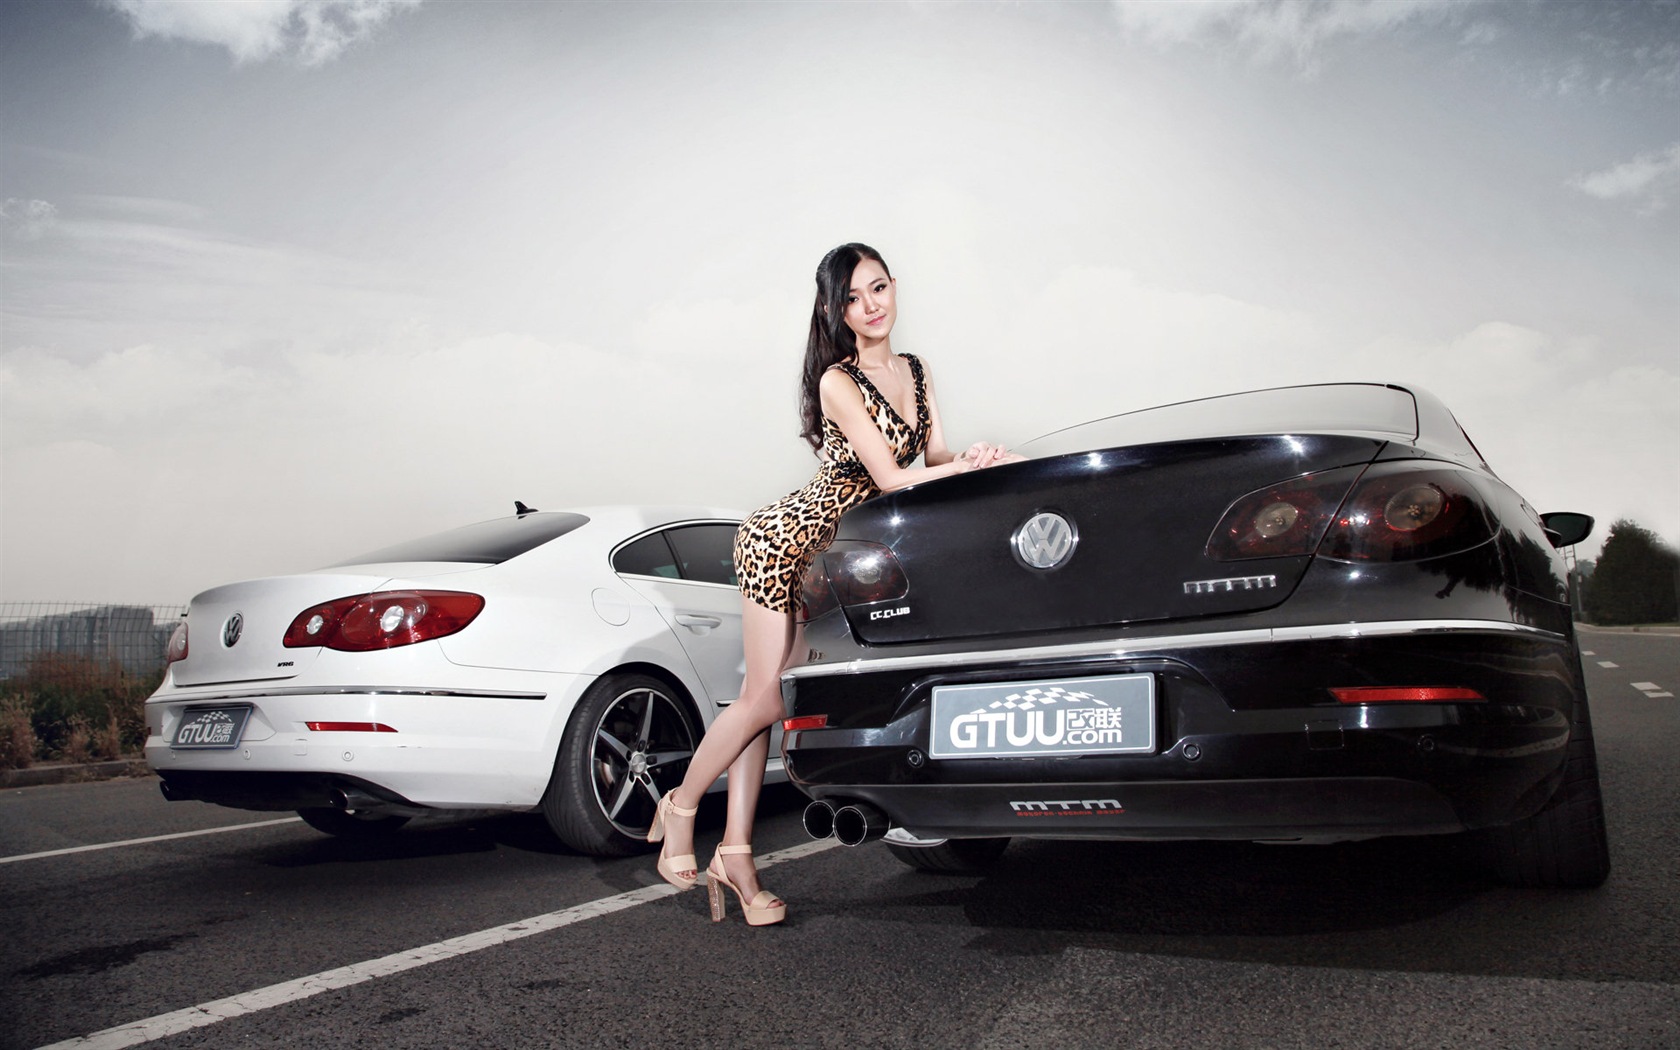 Beautiful leopard dress girl with Volkswagen sports car wallpapers #7 - 1680x1050